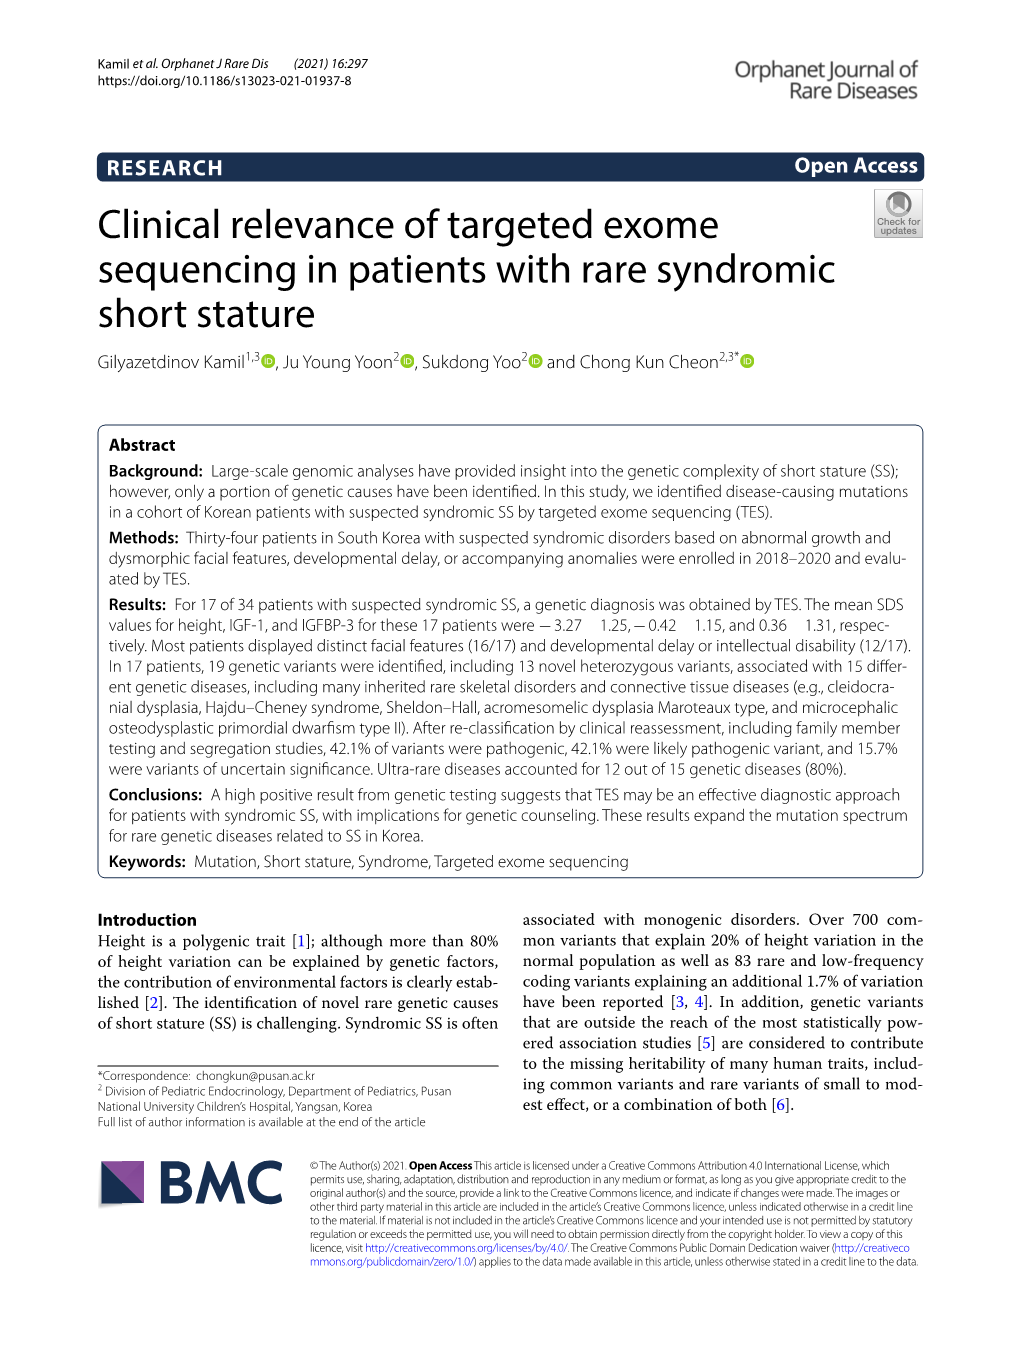 Clinical Relevance of Targeted Exome Sequencing in Patients with Rare